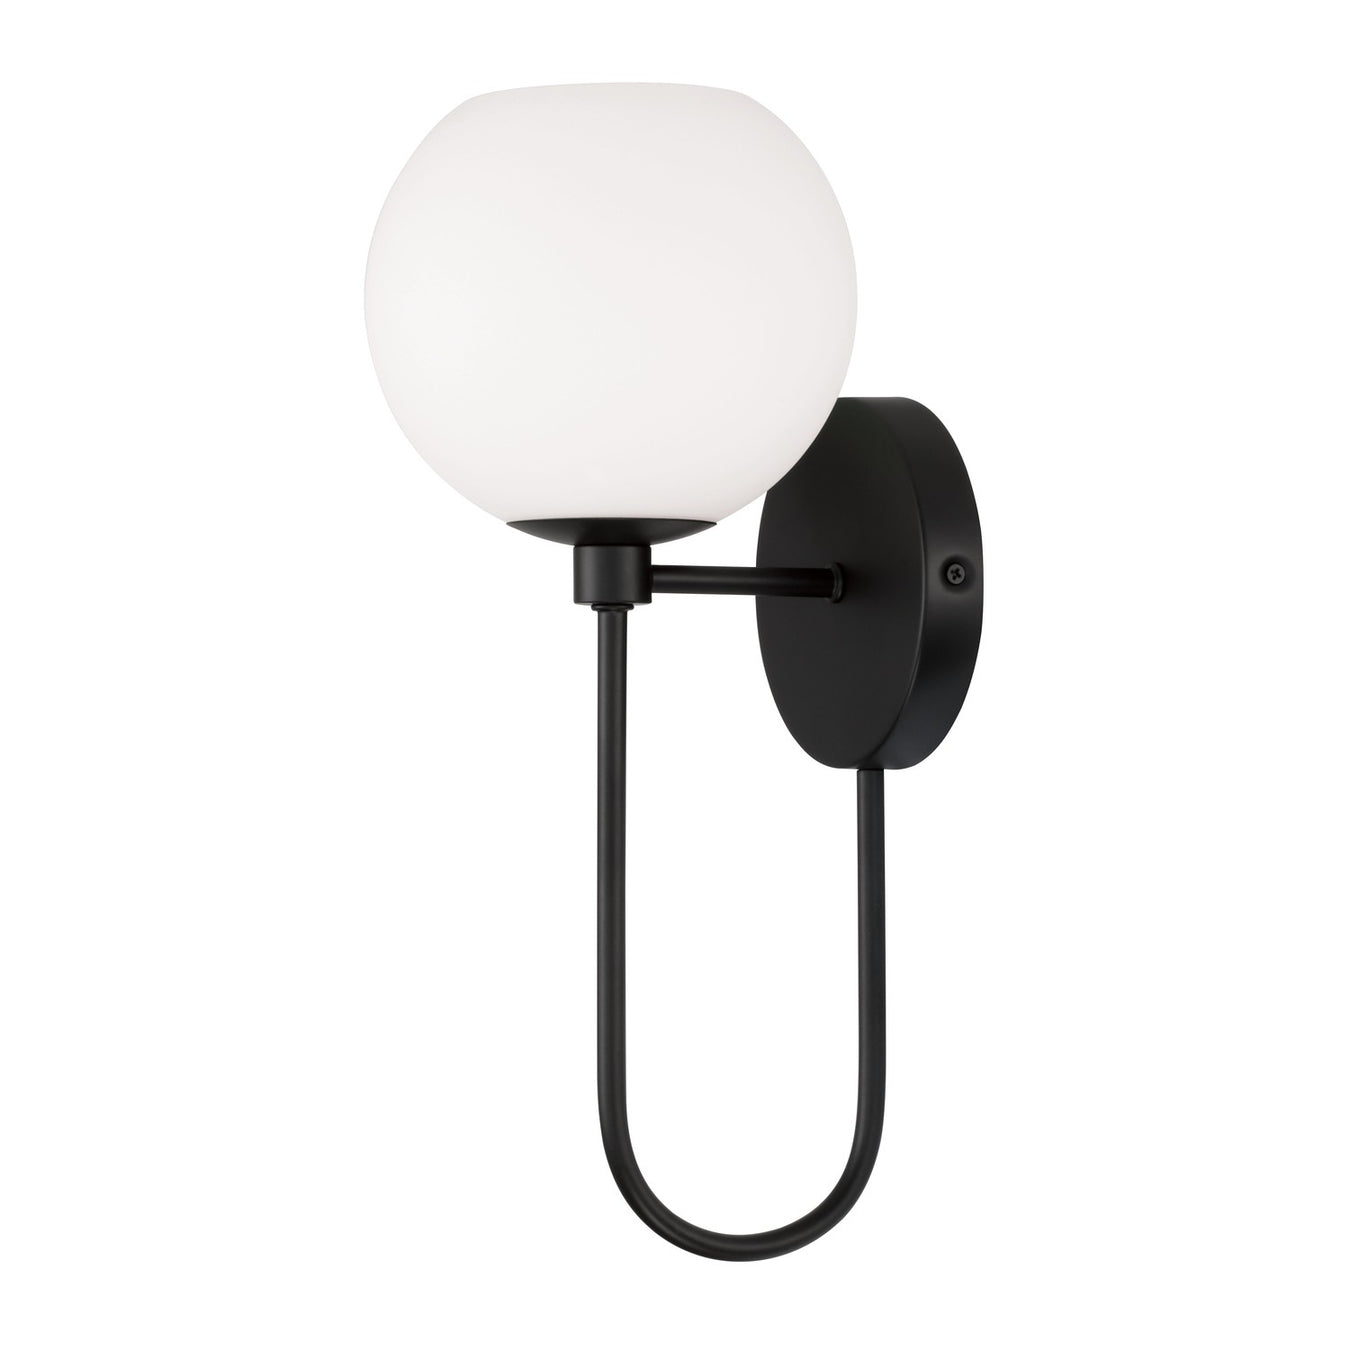 Ansley One Light Wall Sconce in Matte Black